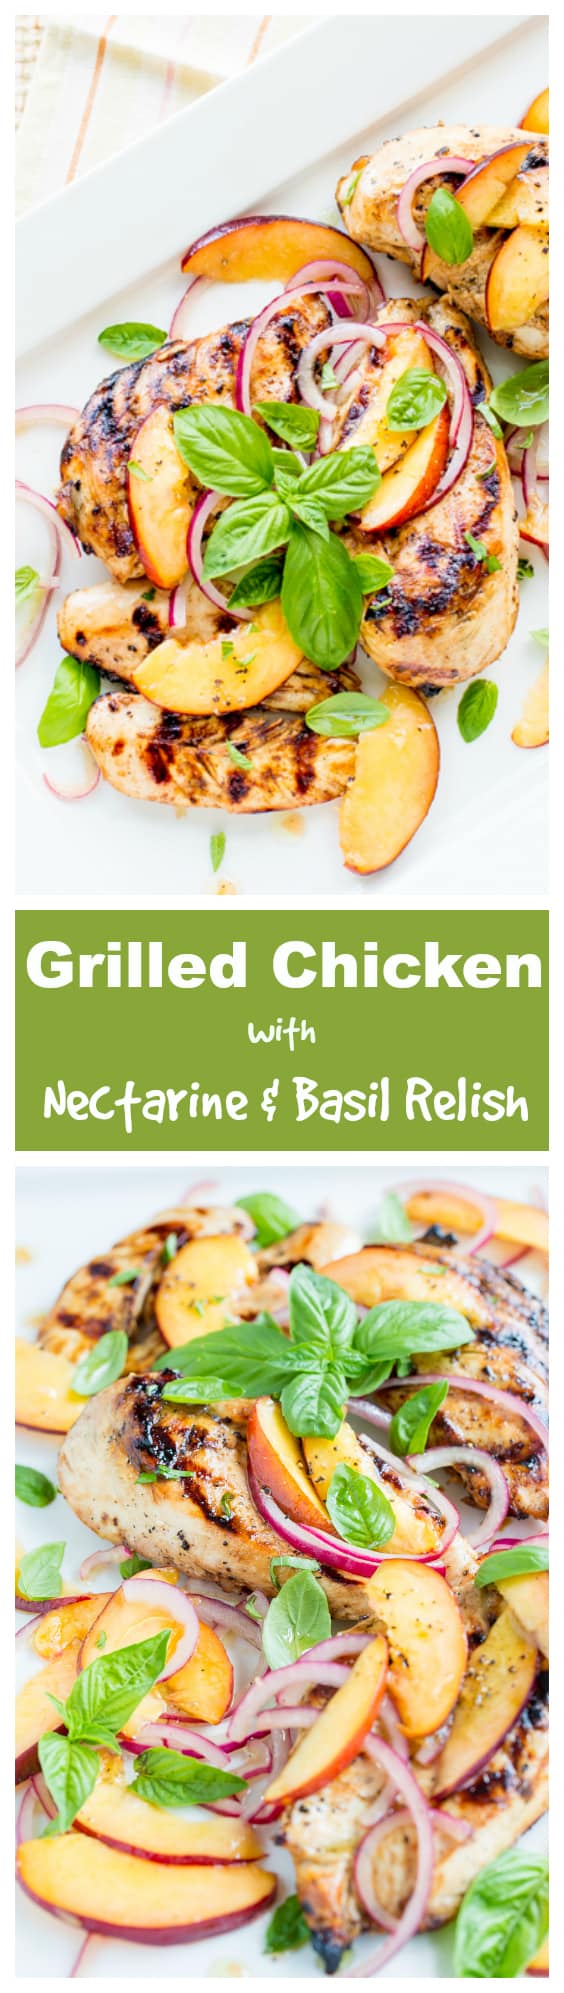 Juicy Grilled Chicken with fresh Nectarines, Onions and Basil